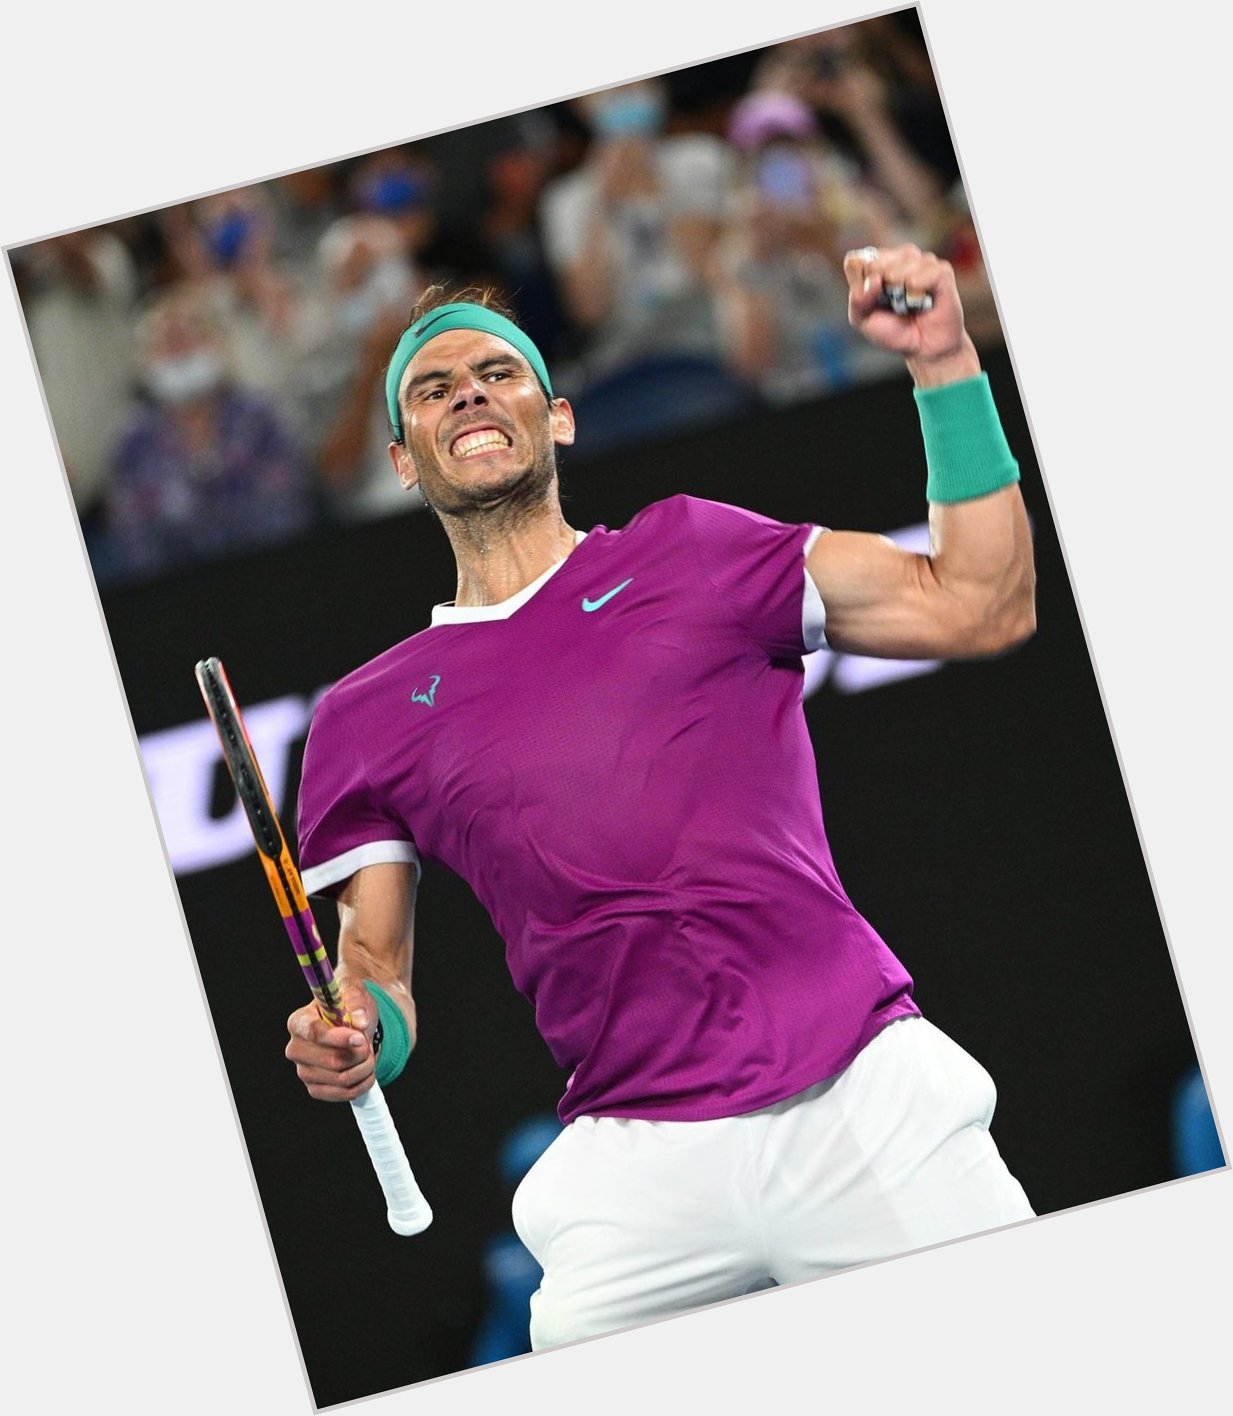 Happy birthday to the greatest tennis player of all time   , my idol   ... Rafael Nadal Parera  